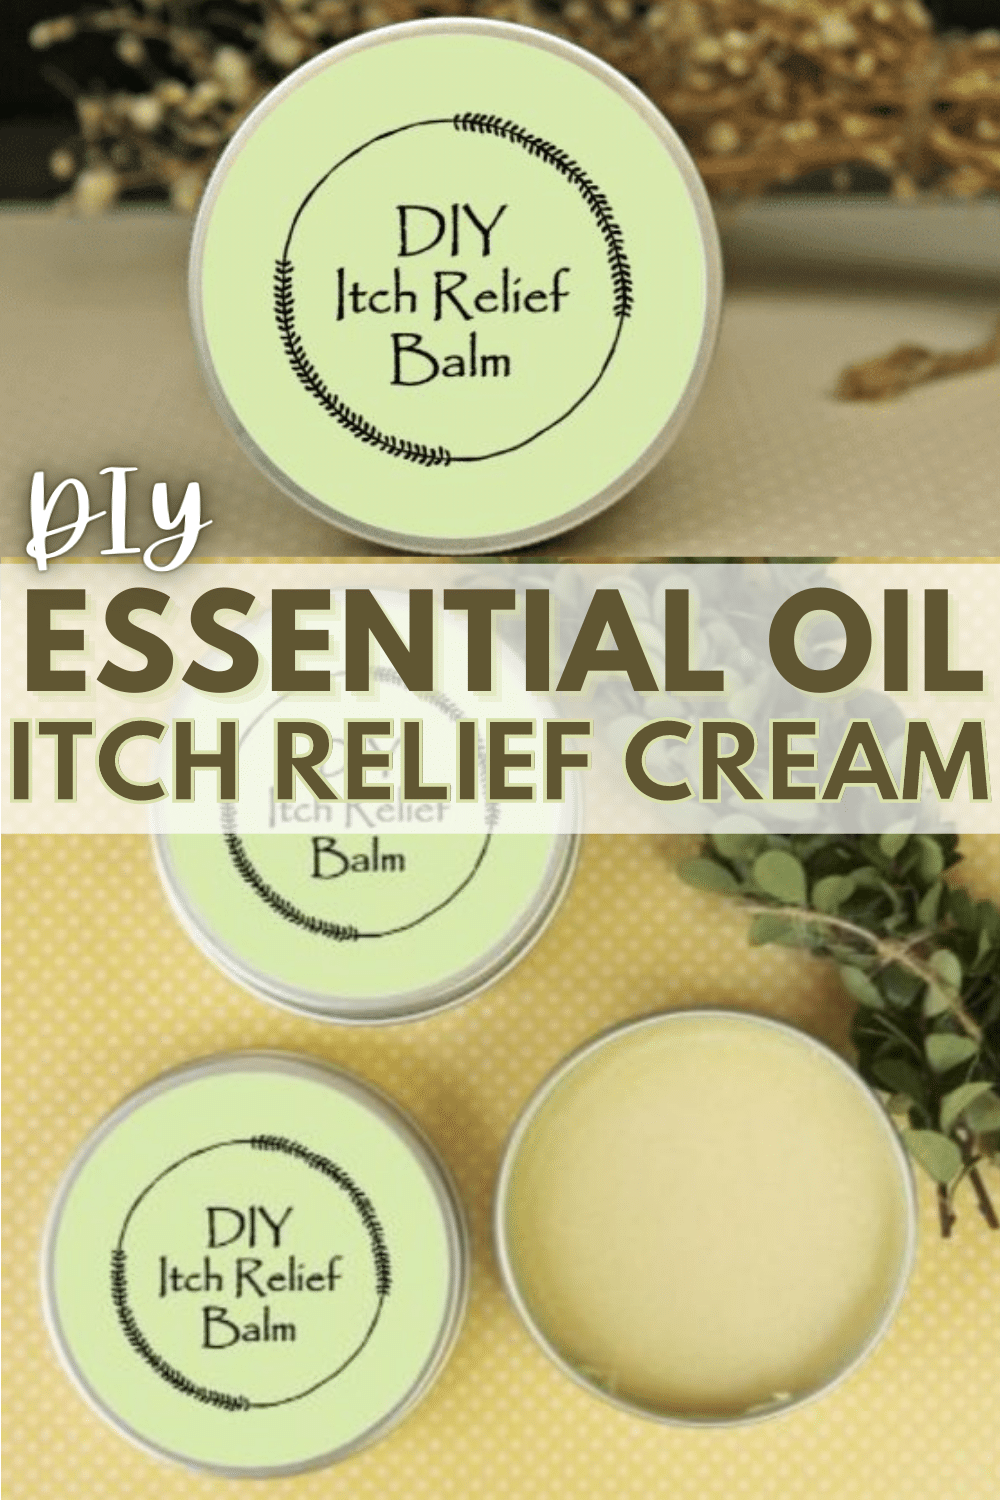 This essential oil itch relief cream is quick to make and can help sooth bug bites, small rashes and itchy skin areas. Grab a printable lid label too! #essentialoils #skin #diy via @wondermomwannab